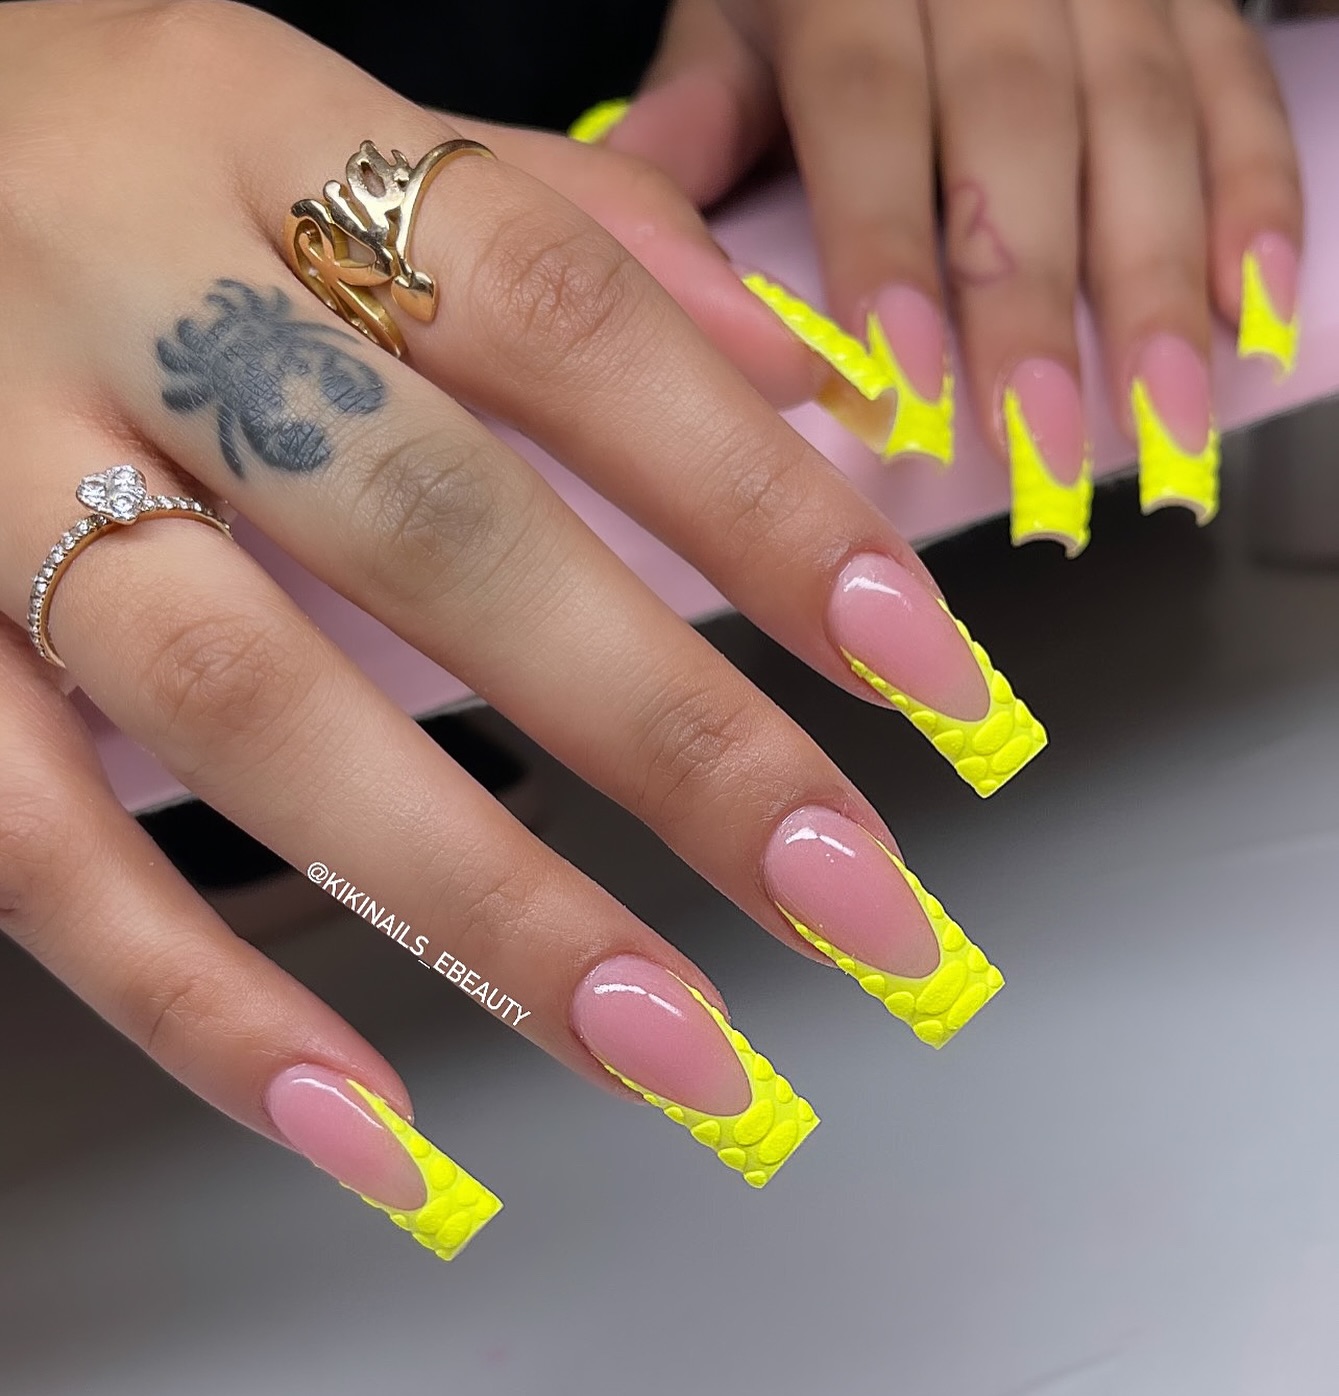 Glamorous Summer Acrylic Nail Designs 2024: Elevate Your Style